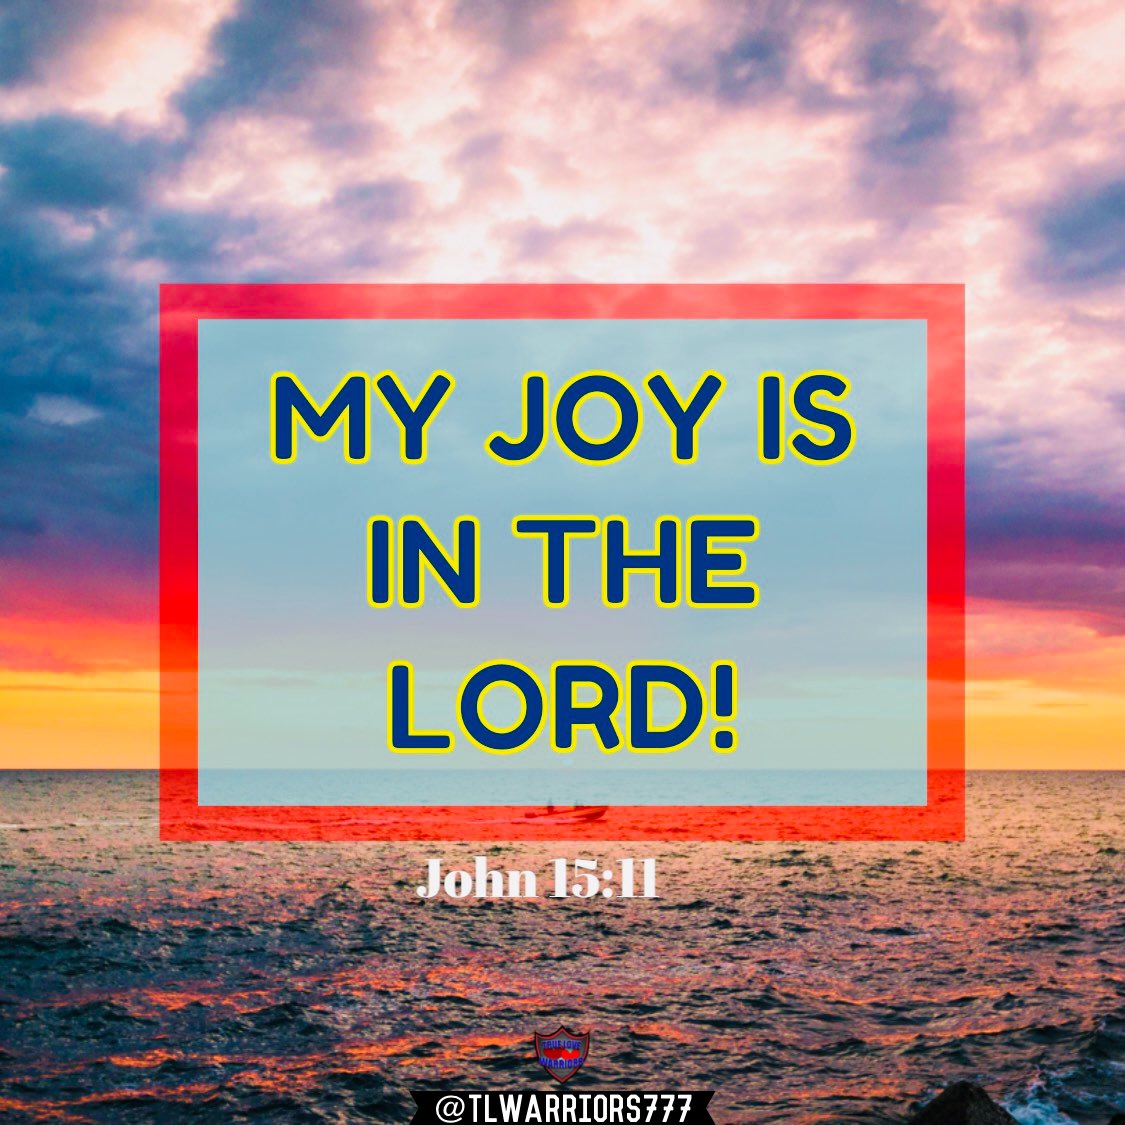 “I have told you these things so that My joy may be in you and your joy may be complete.” John 15:11